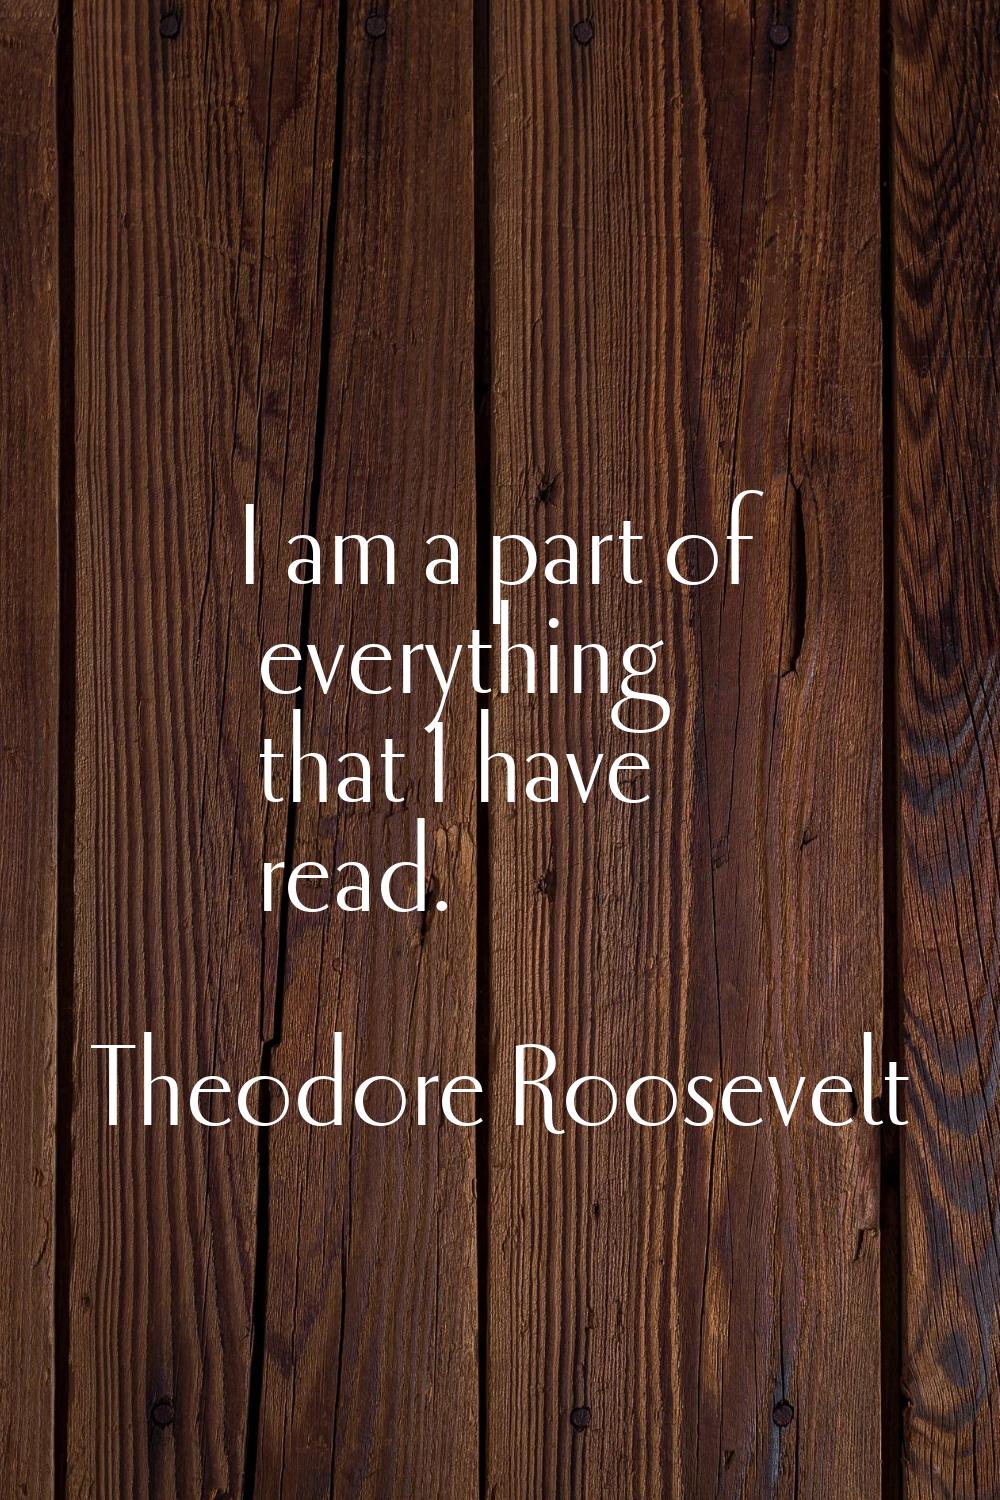 I am a part of everything that I have read.